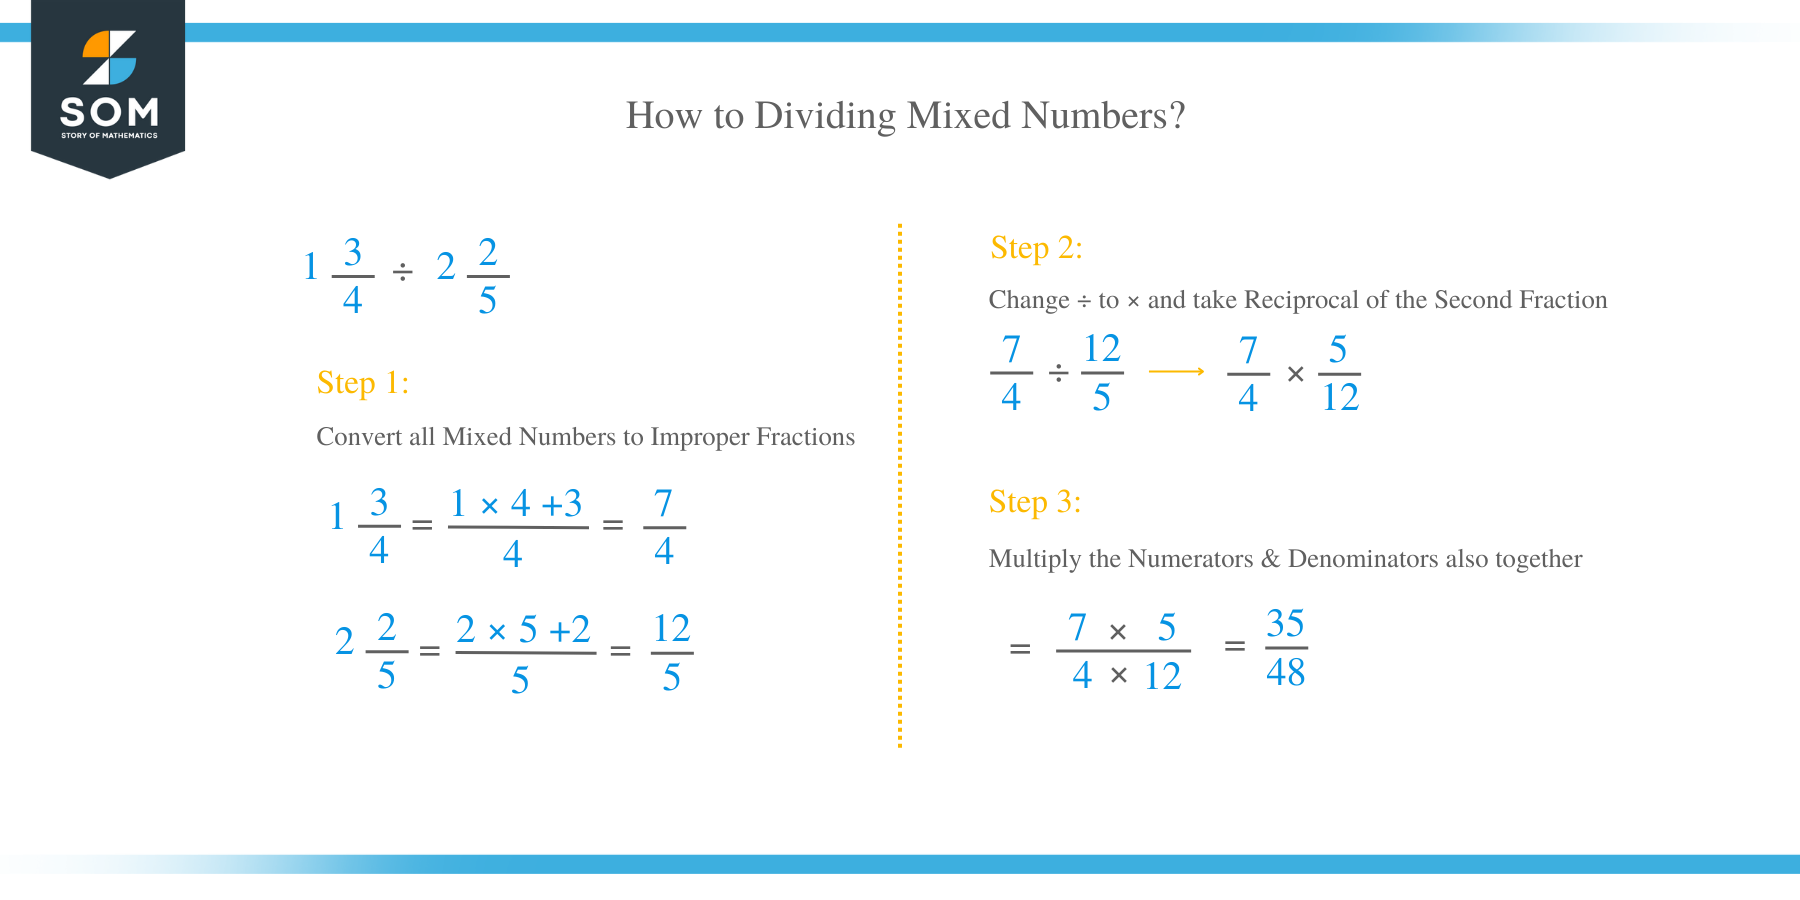 How to Divide Mixed Numbers?